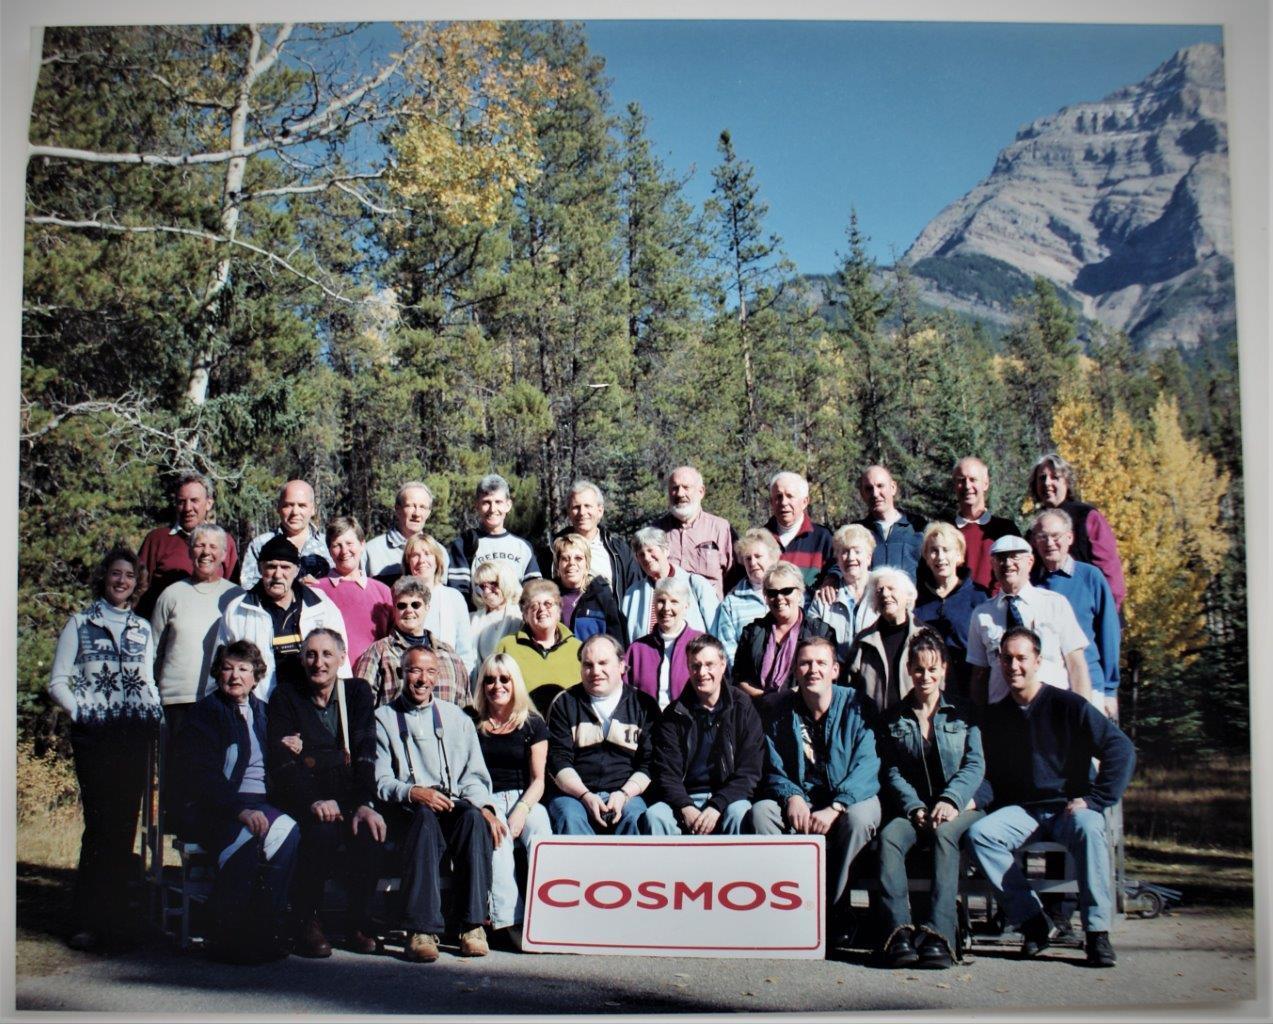 A tour group of about 35 people standing and sitting in four rows. Behind them is a blue sky, a rocky mountainside and forest trees. A sign in front reads COSMOS